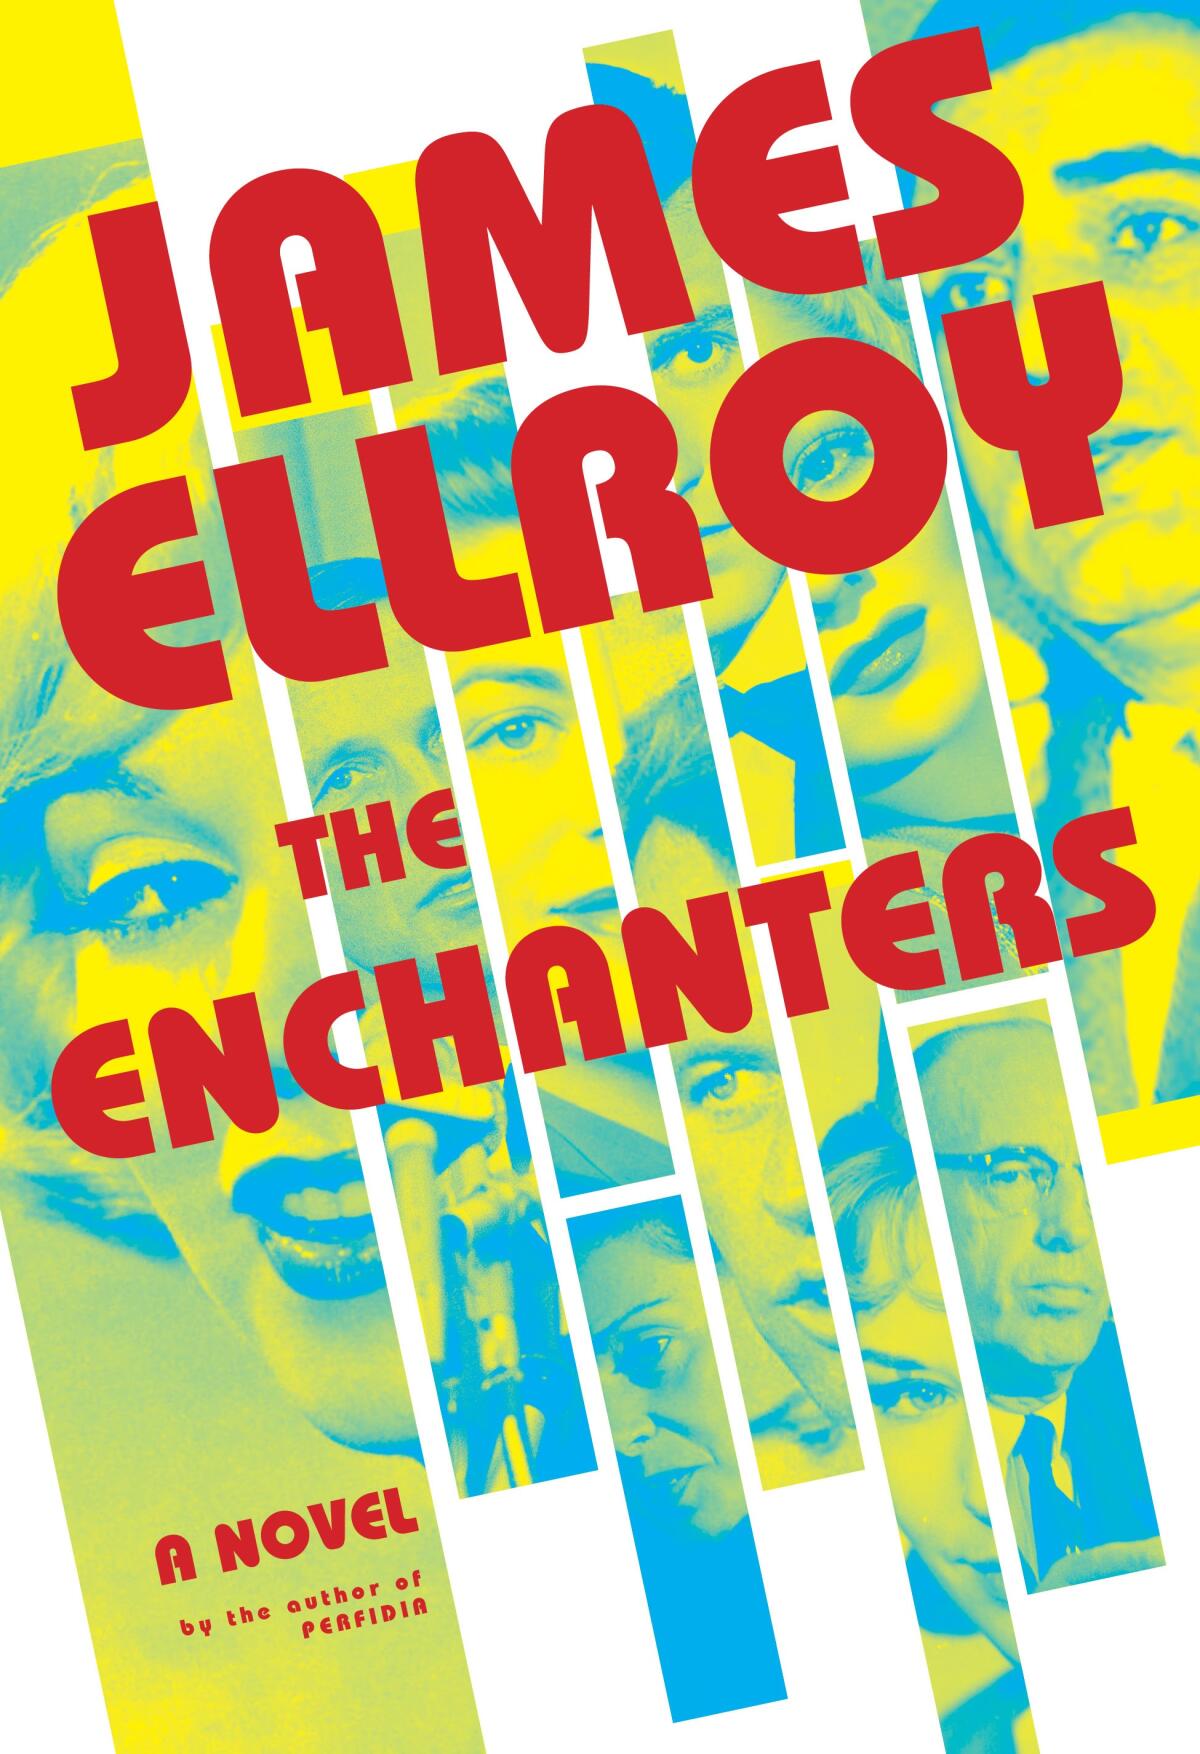 "The Enchanters," by James Ellroy